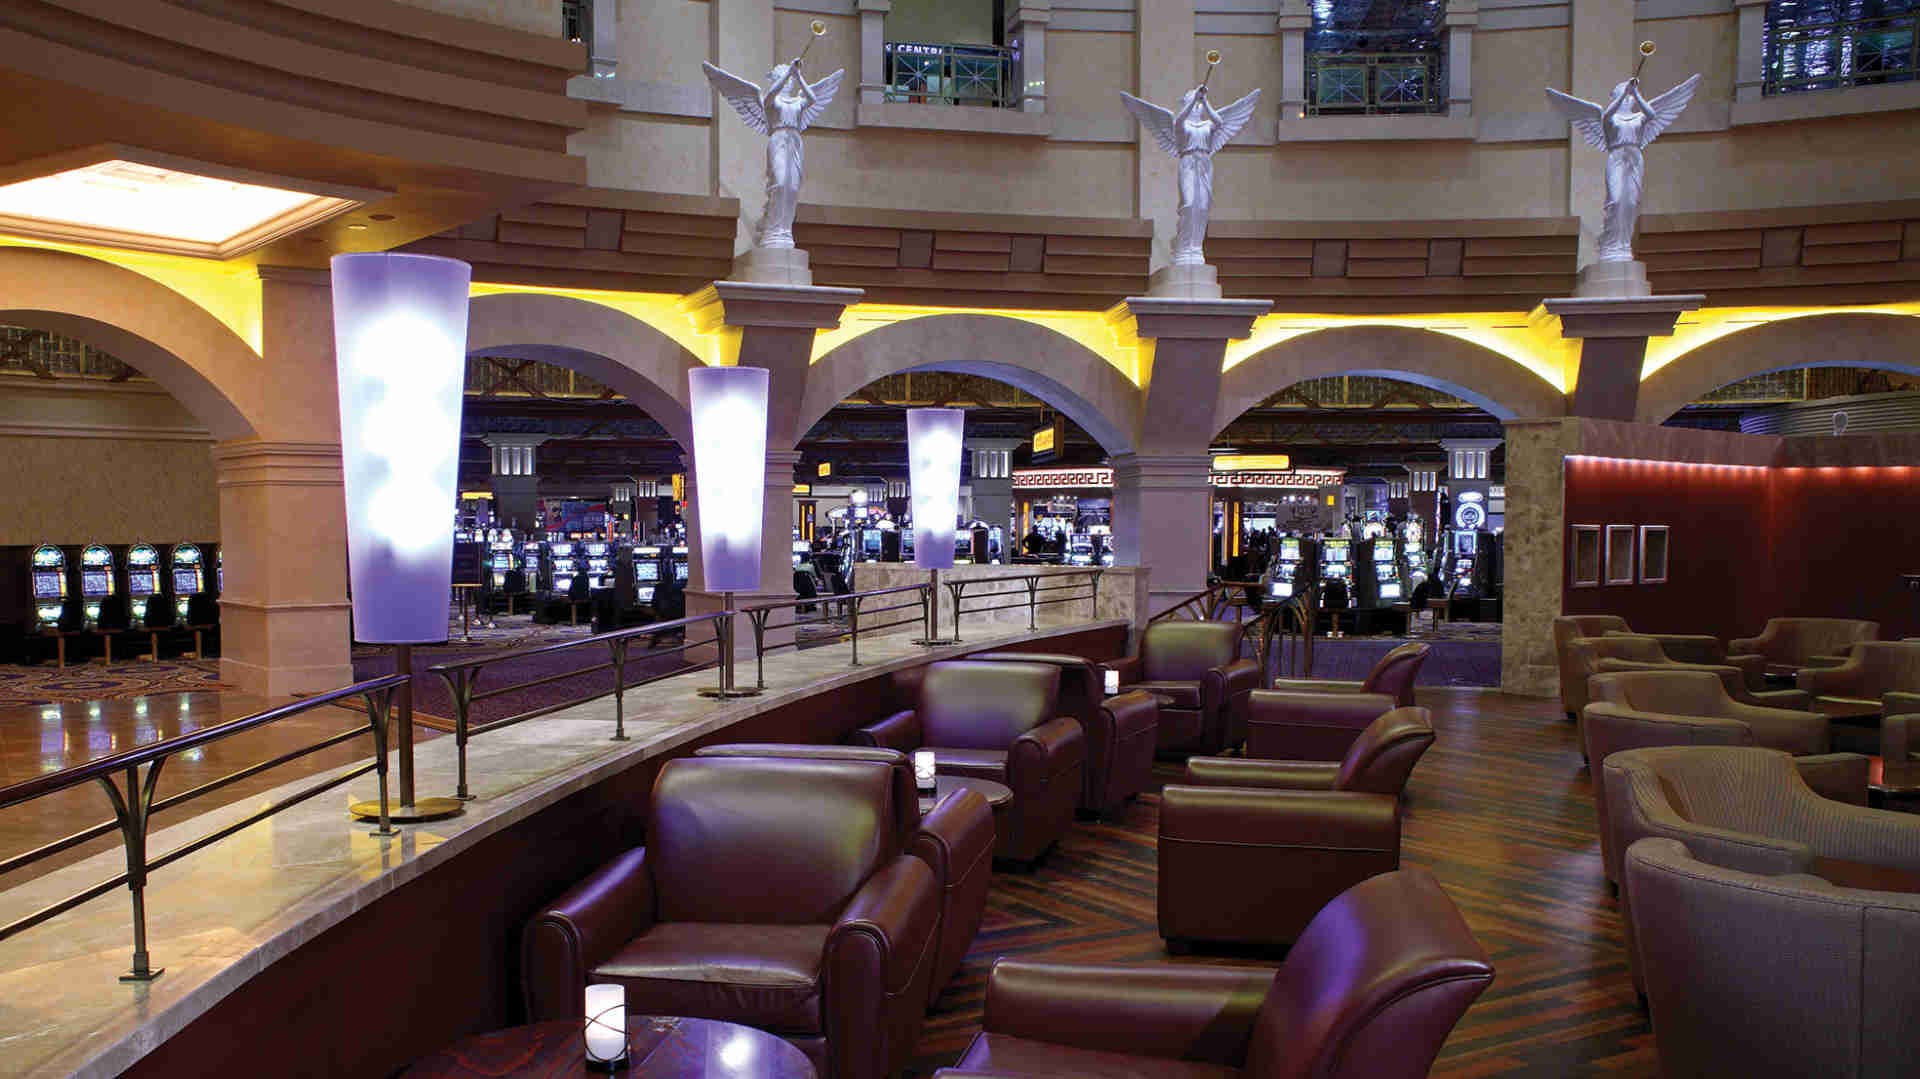 Lounge Area at the Caesars Windsor Casino - Contract Administration & Commissioning - Engineering Harmonics